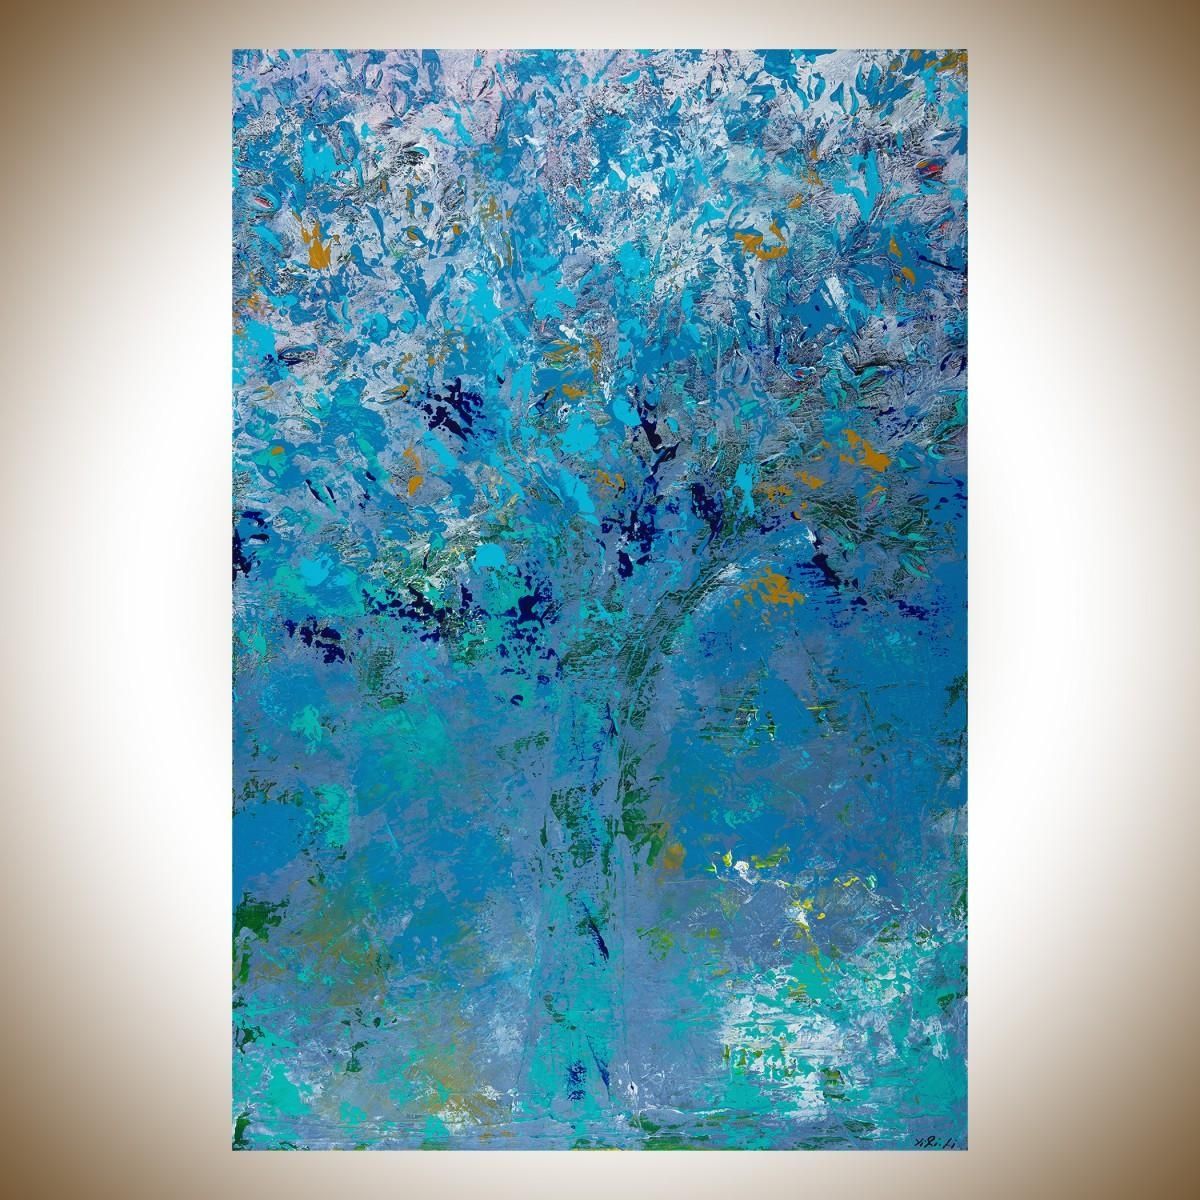 First Snowfallqiqigallery 36"x24" Original Modern Contemporary With Regard To Teal And Gold Wall Art (Photo 1 of 20)